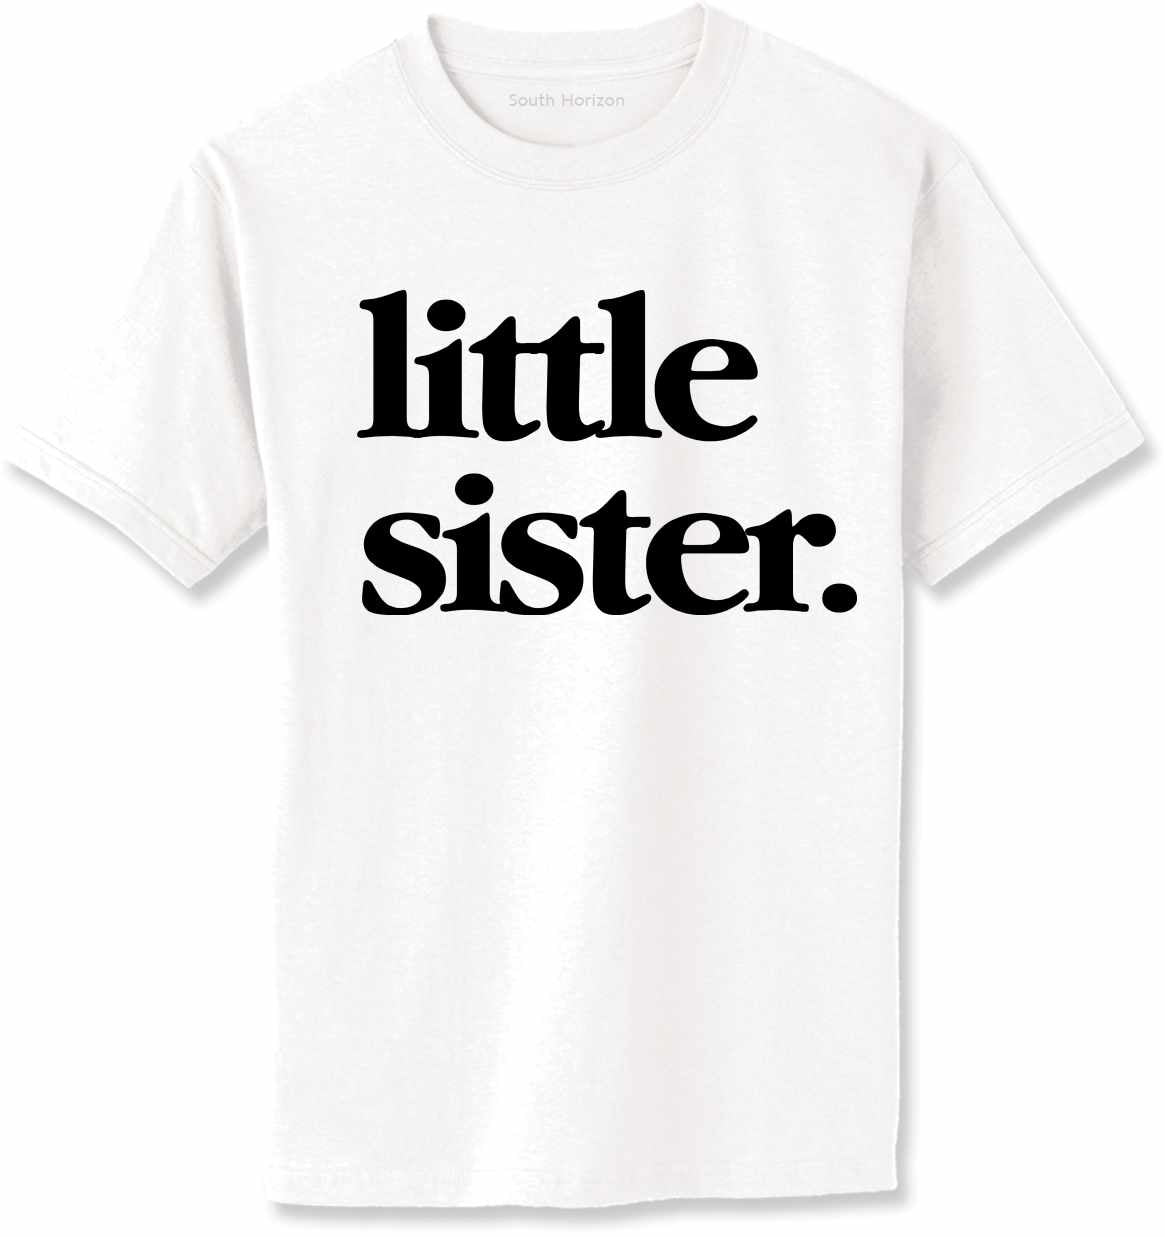 Little Sister on Adult T-Shirt (#1321-1)